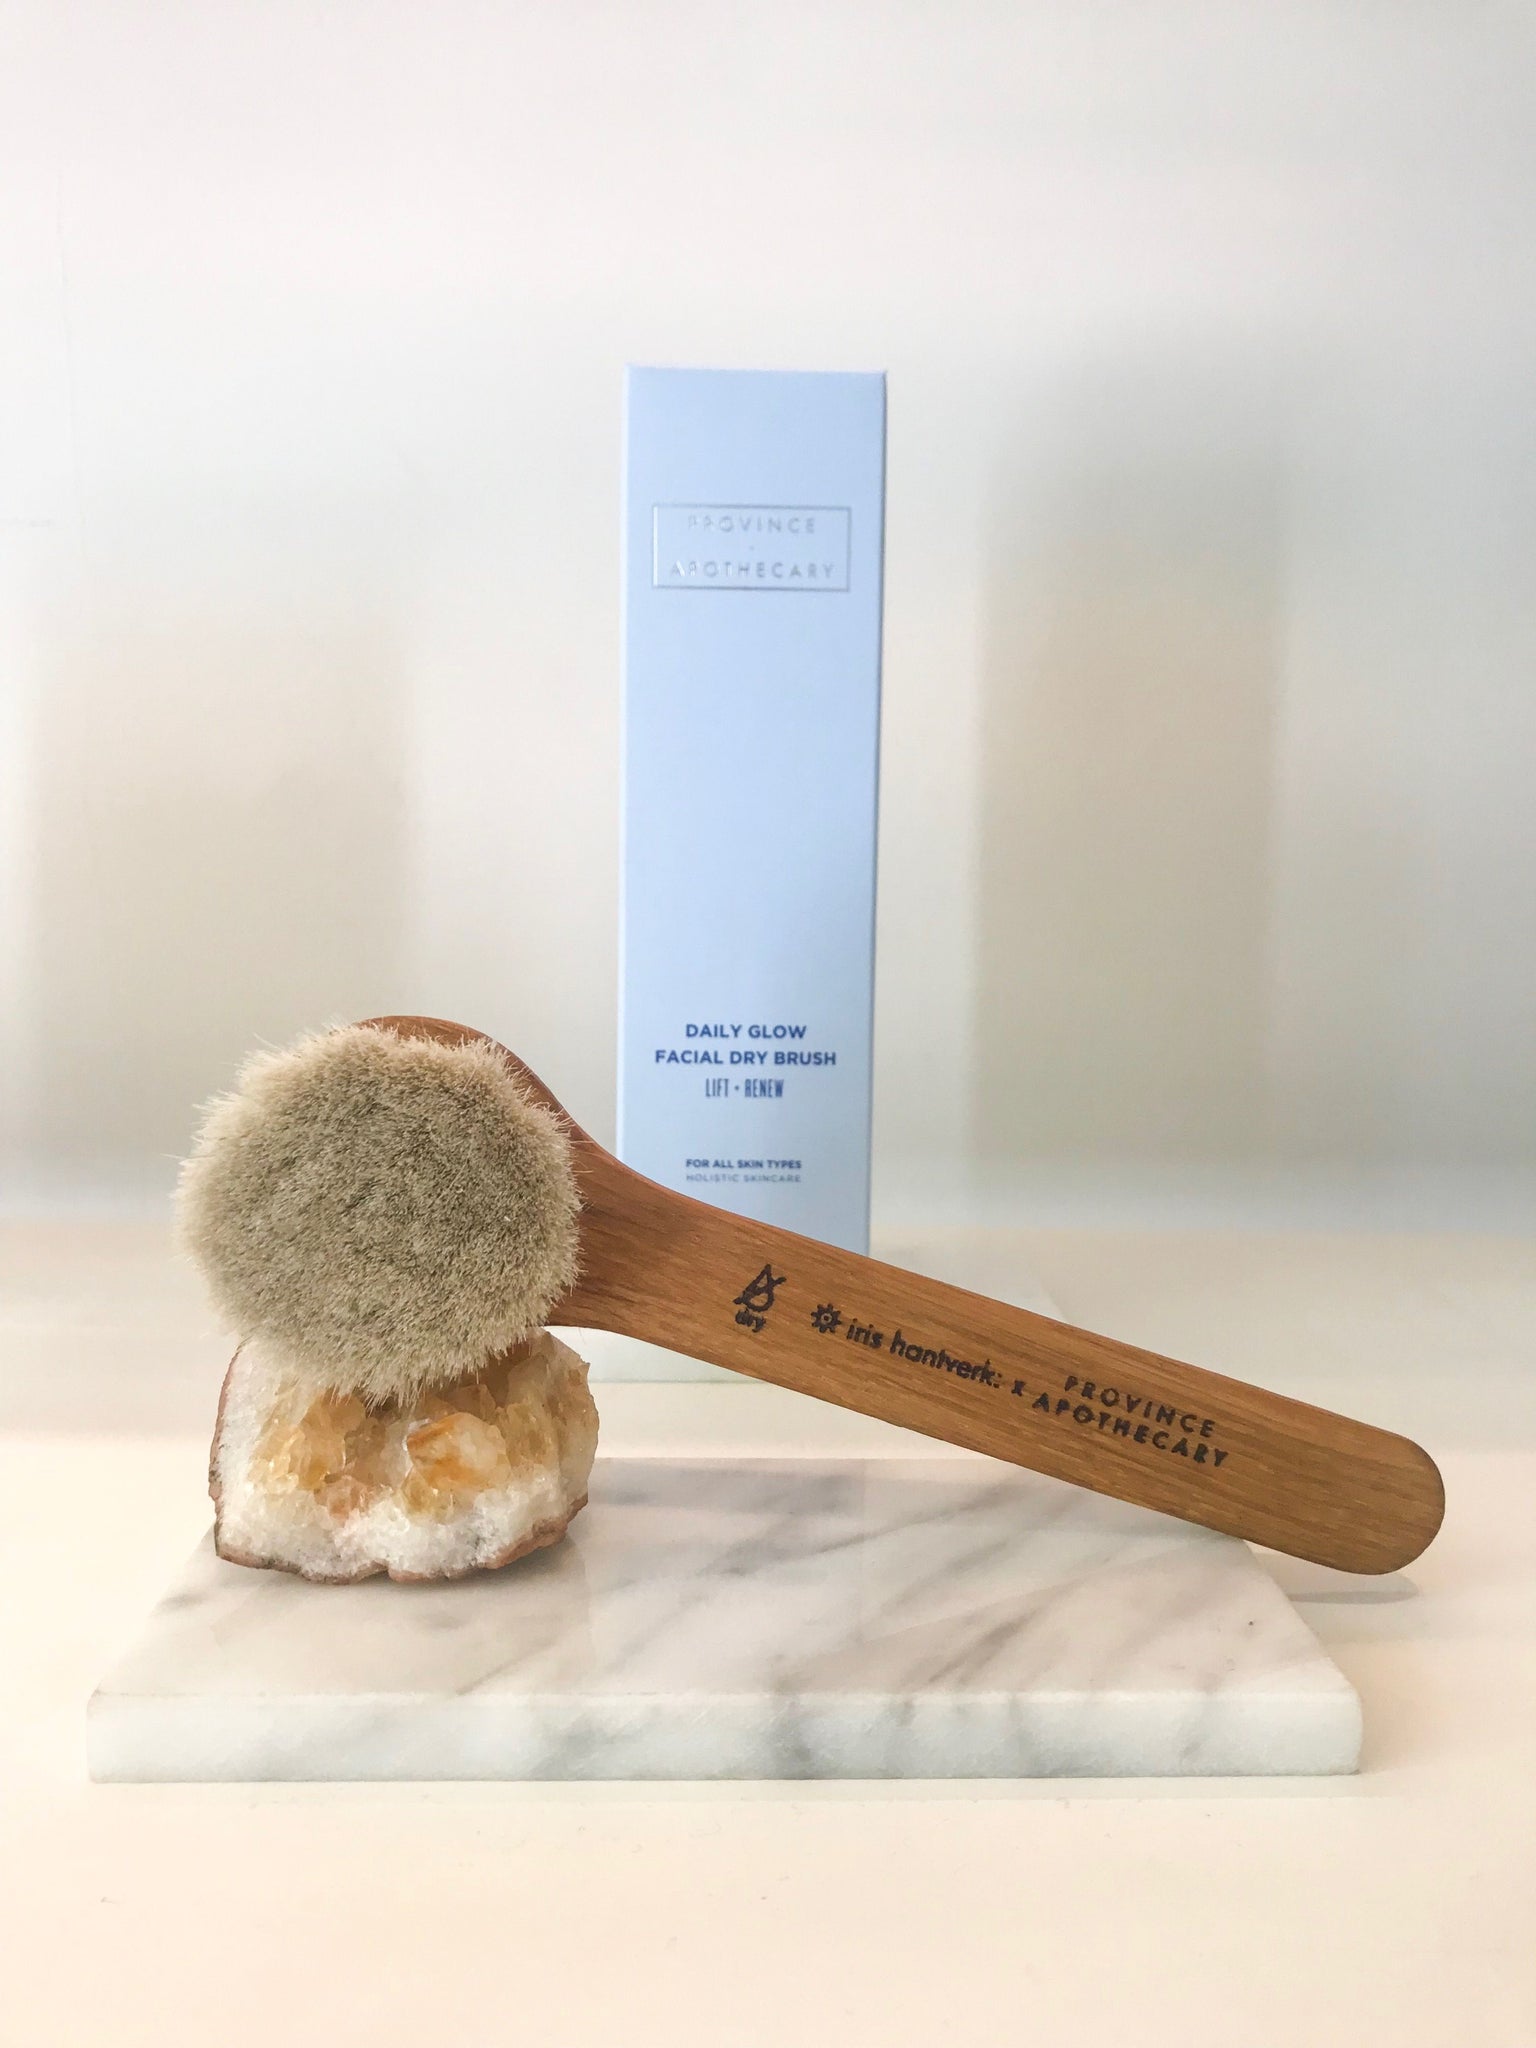 dry brush for dull congested skin blemishes